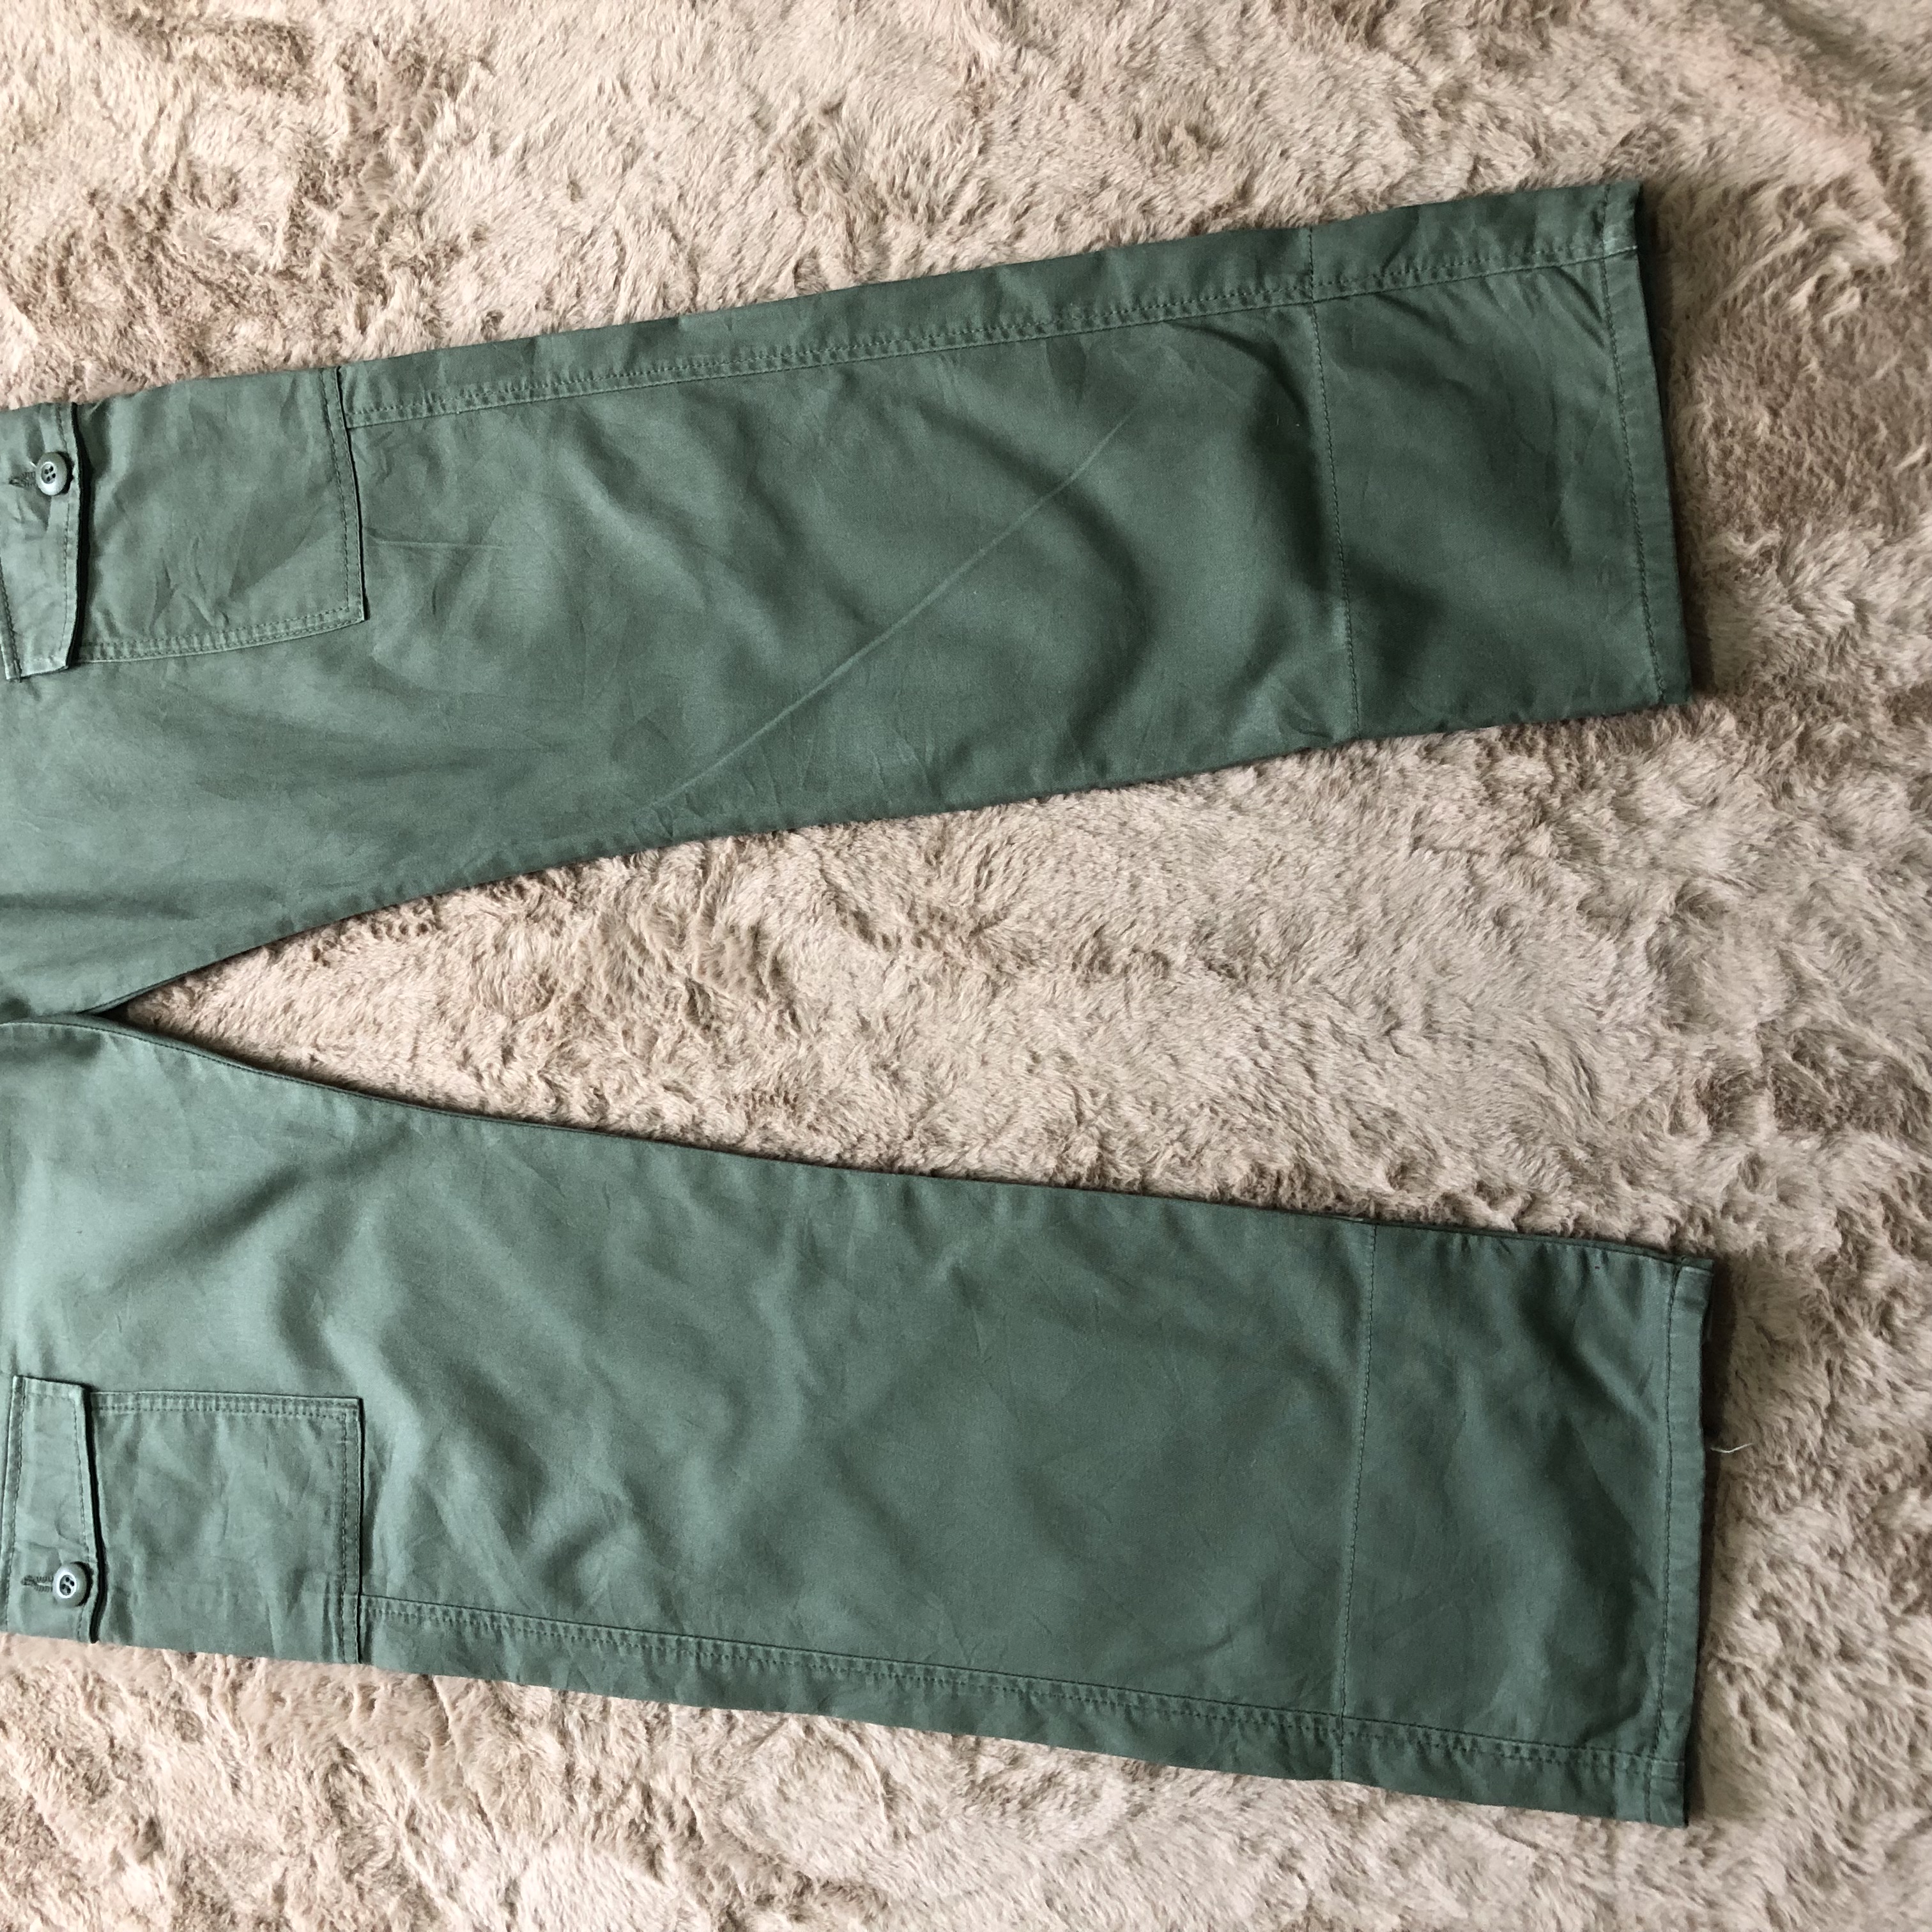 Japanese Brand - Plus One Military Army Style Cargo Pants 6 Pocket #4289-149 - 5